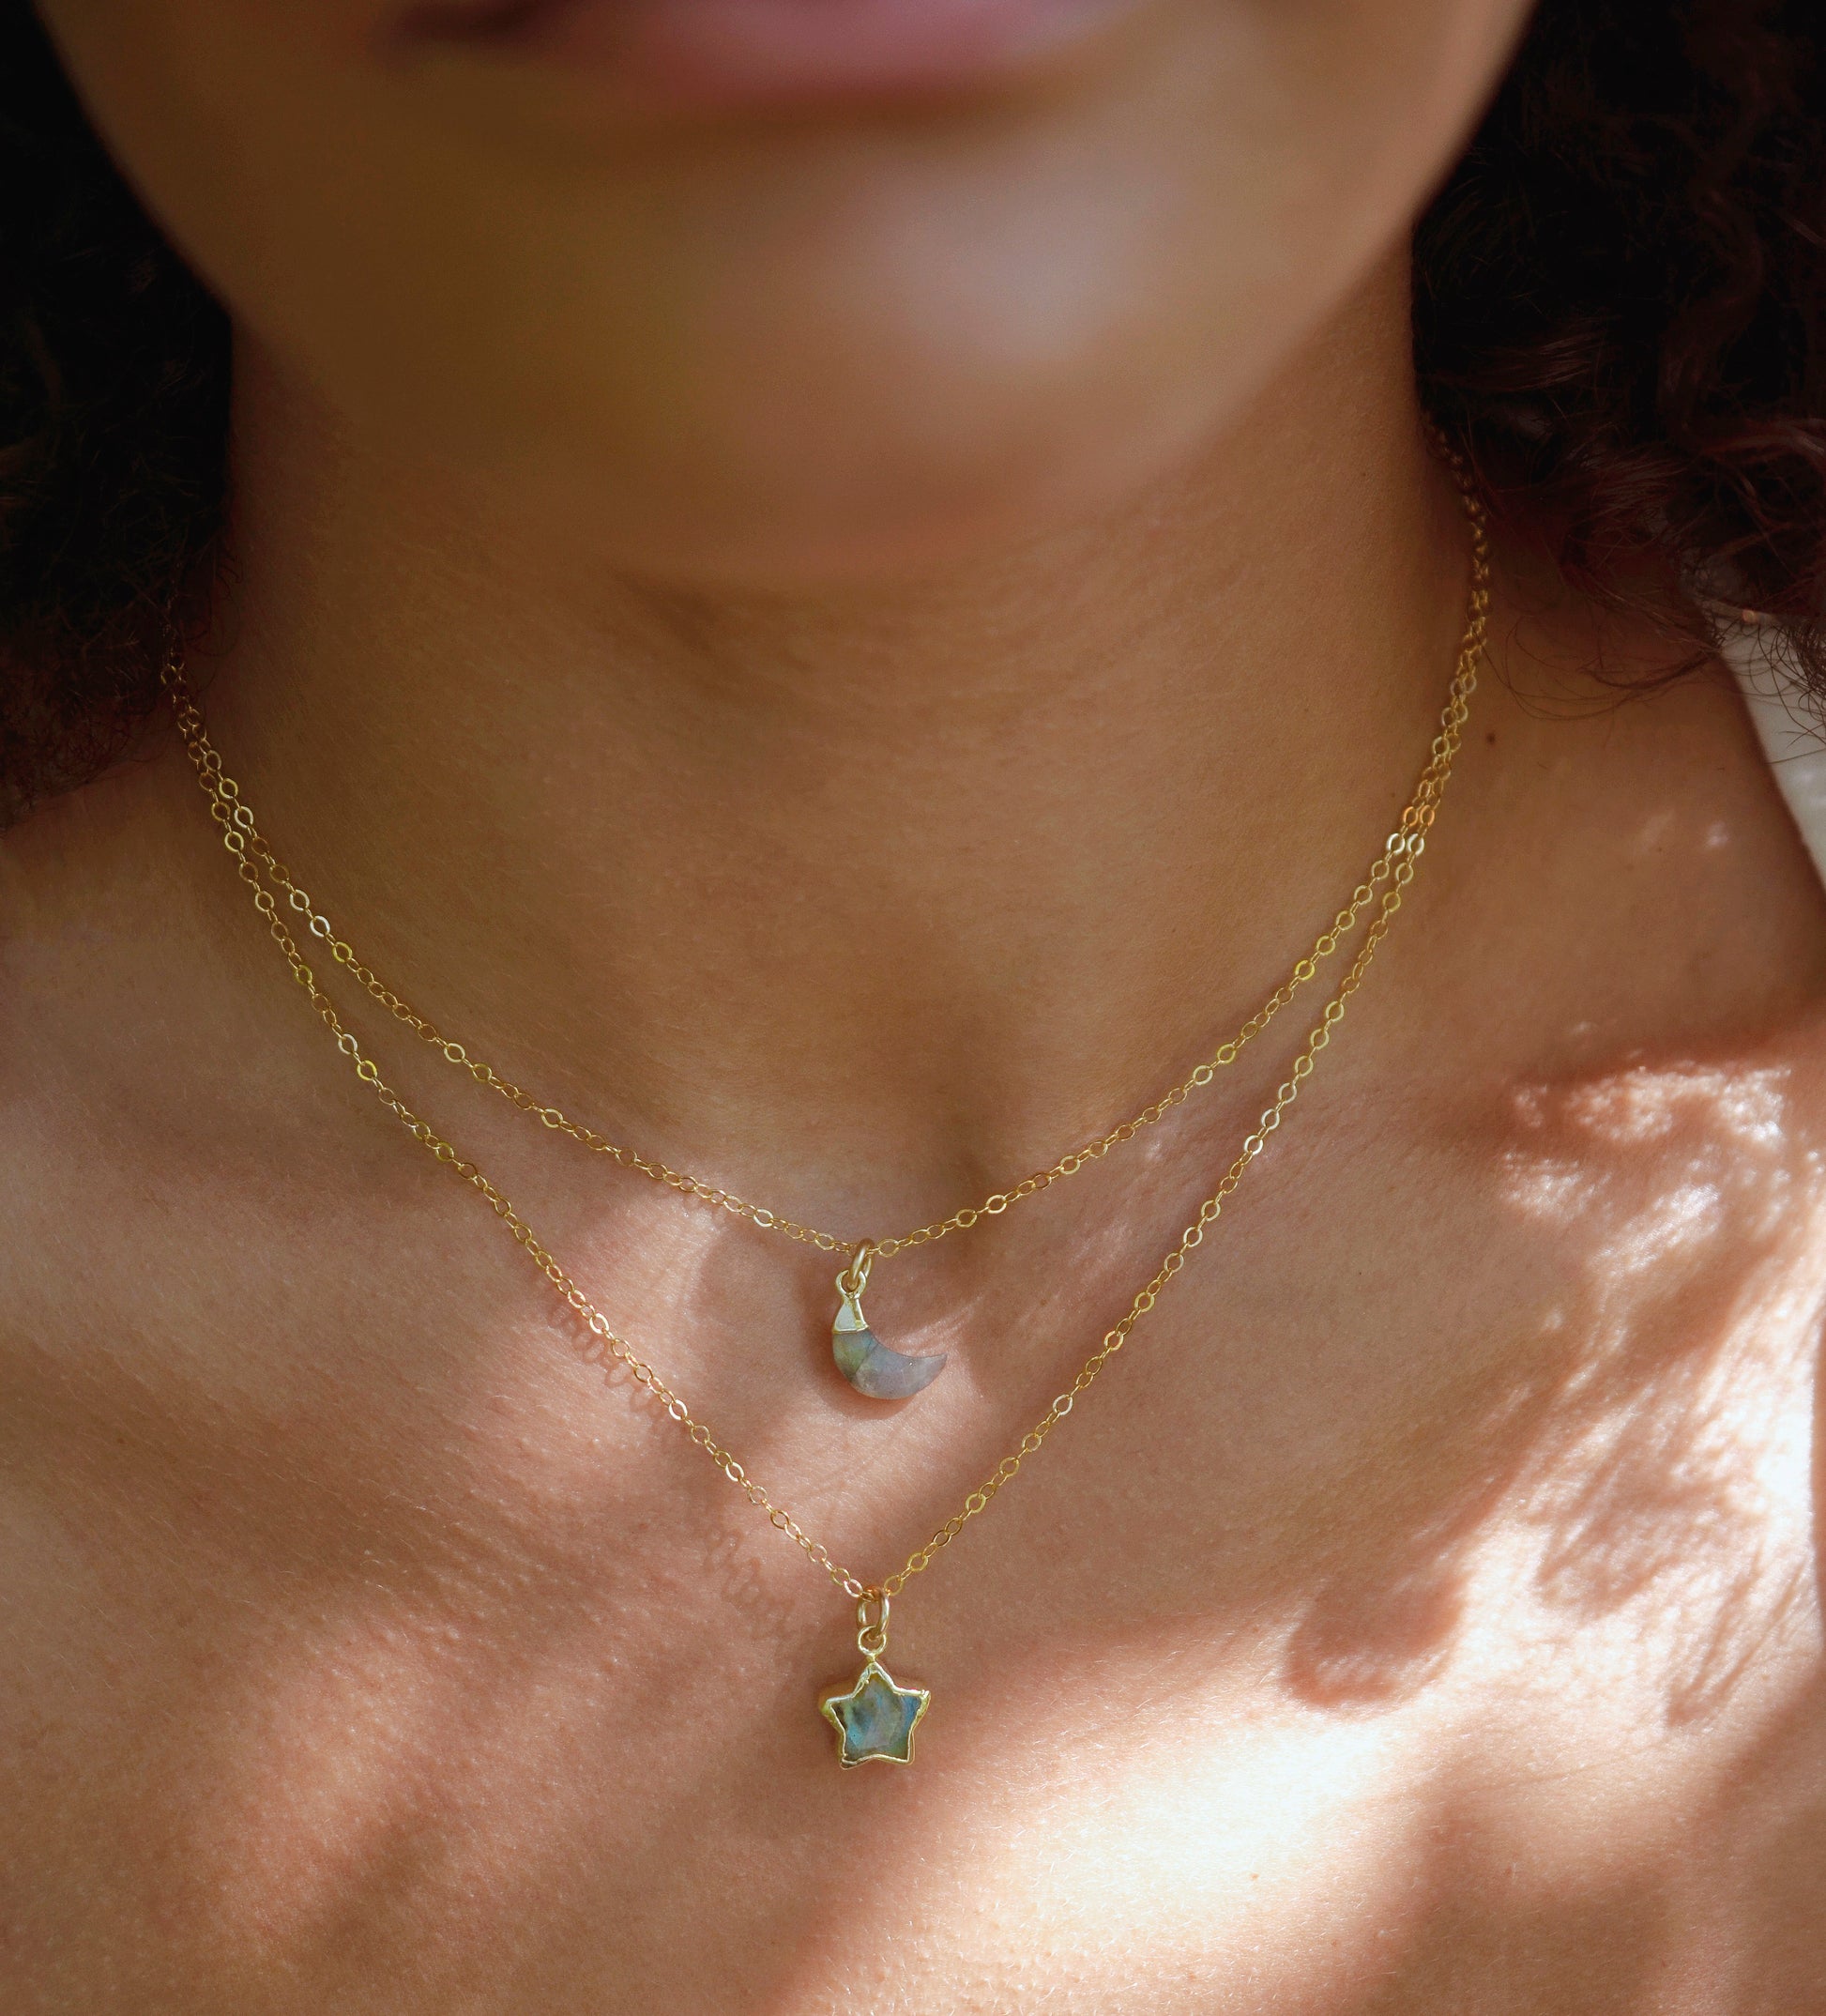 Labradorite star and moon pendants modeled in gold on a simple chain.